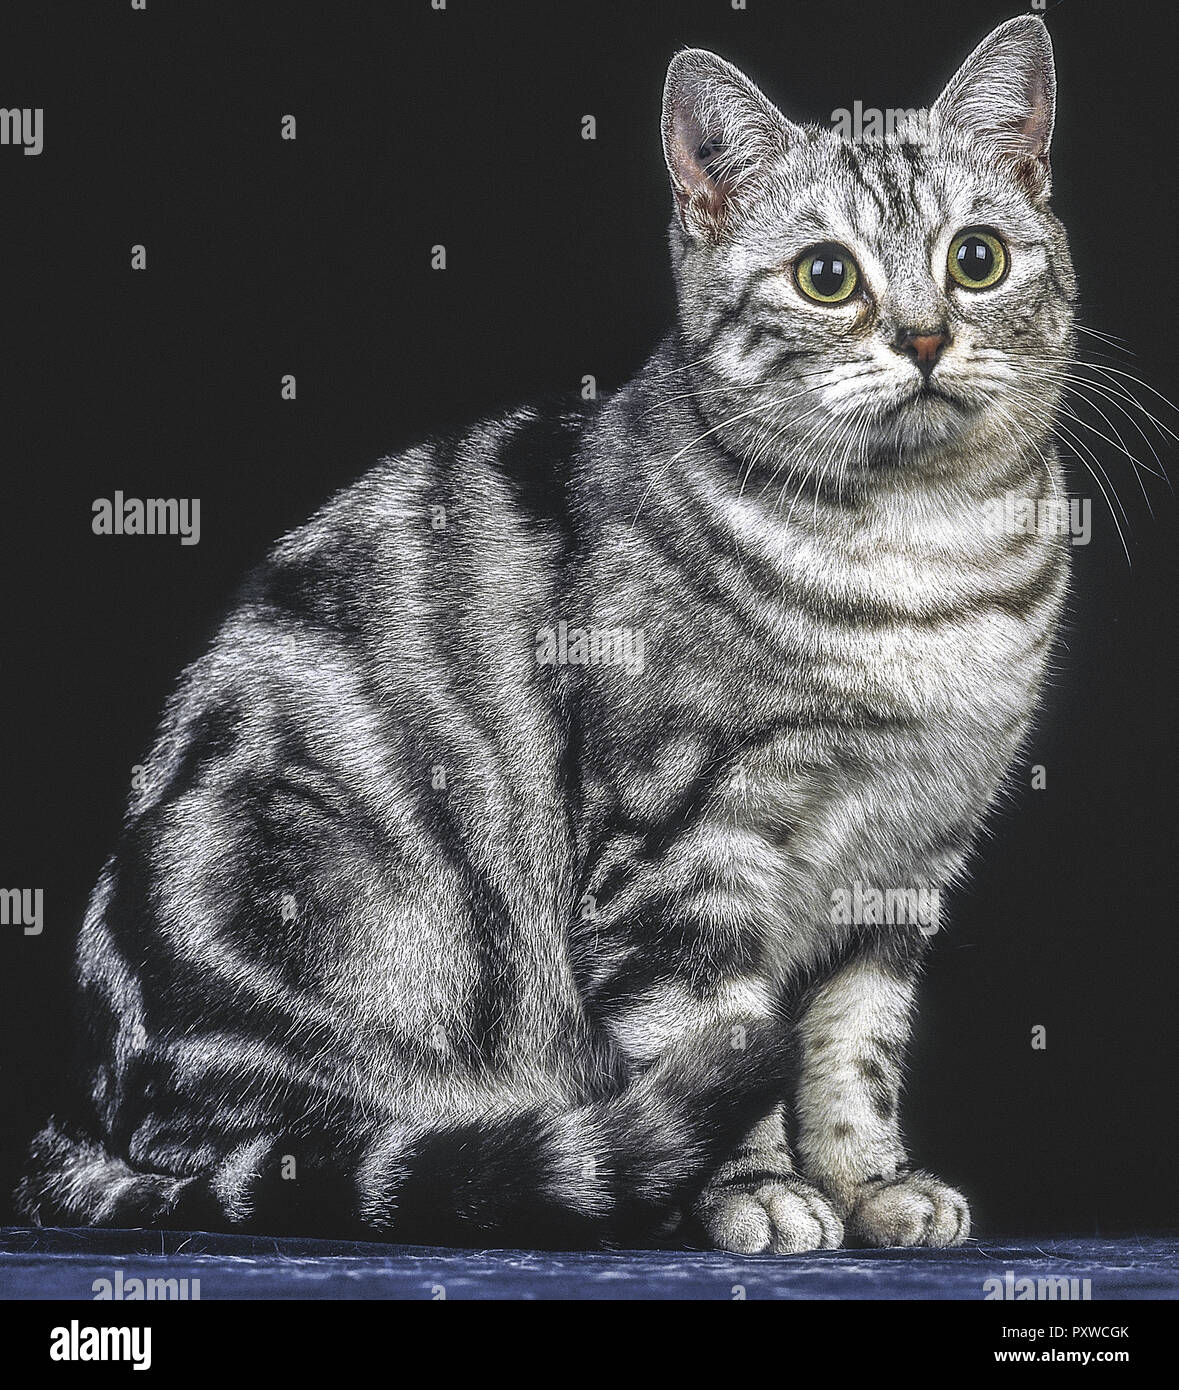 European Silver Tabby High Resolution Stock Photography and Images - Alamy